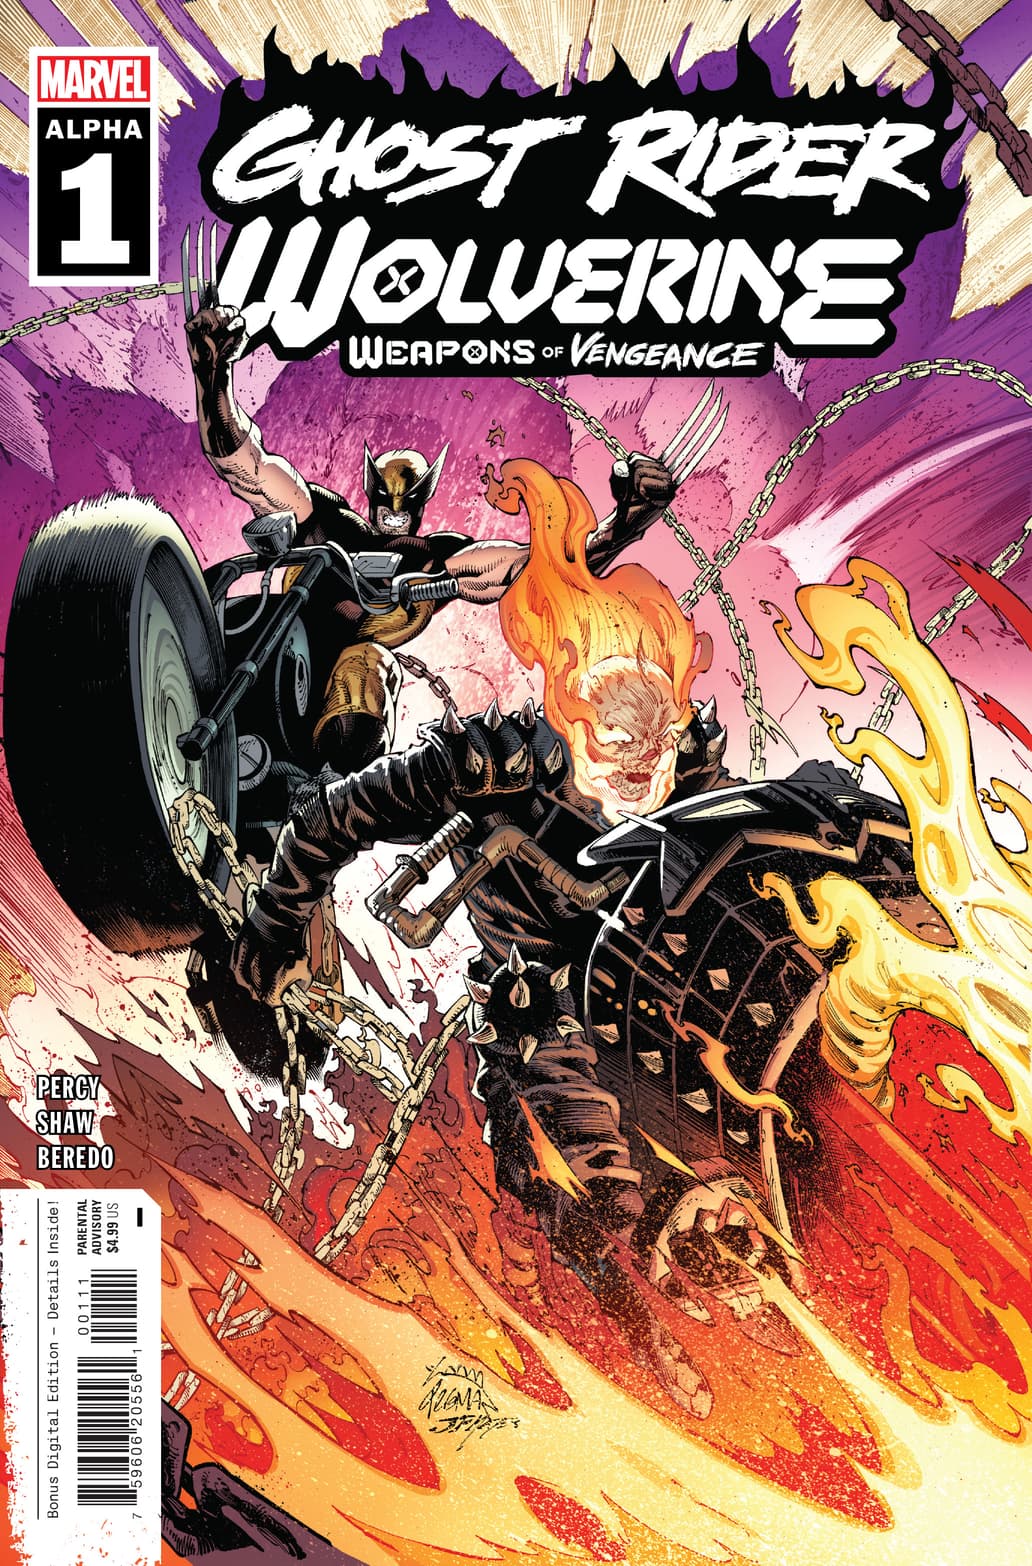 GHOST RIDER/WOLVERINE: WEAPONS OF VENGEANCE ALPHA (2023) #1 cover by Ryan Stegman